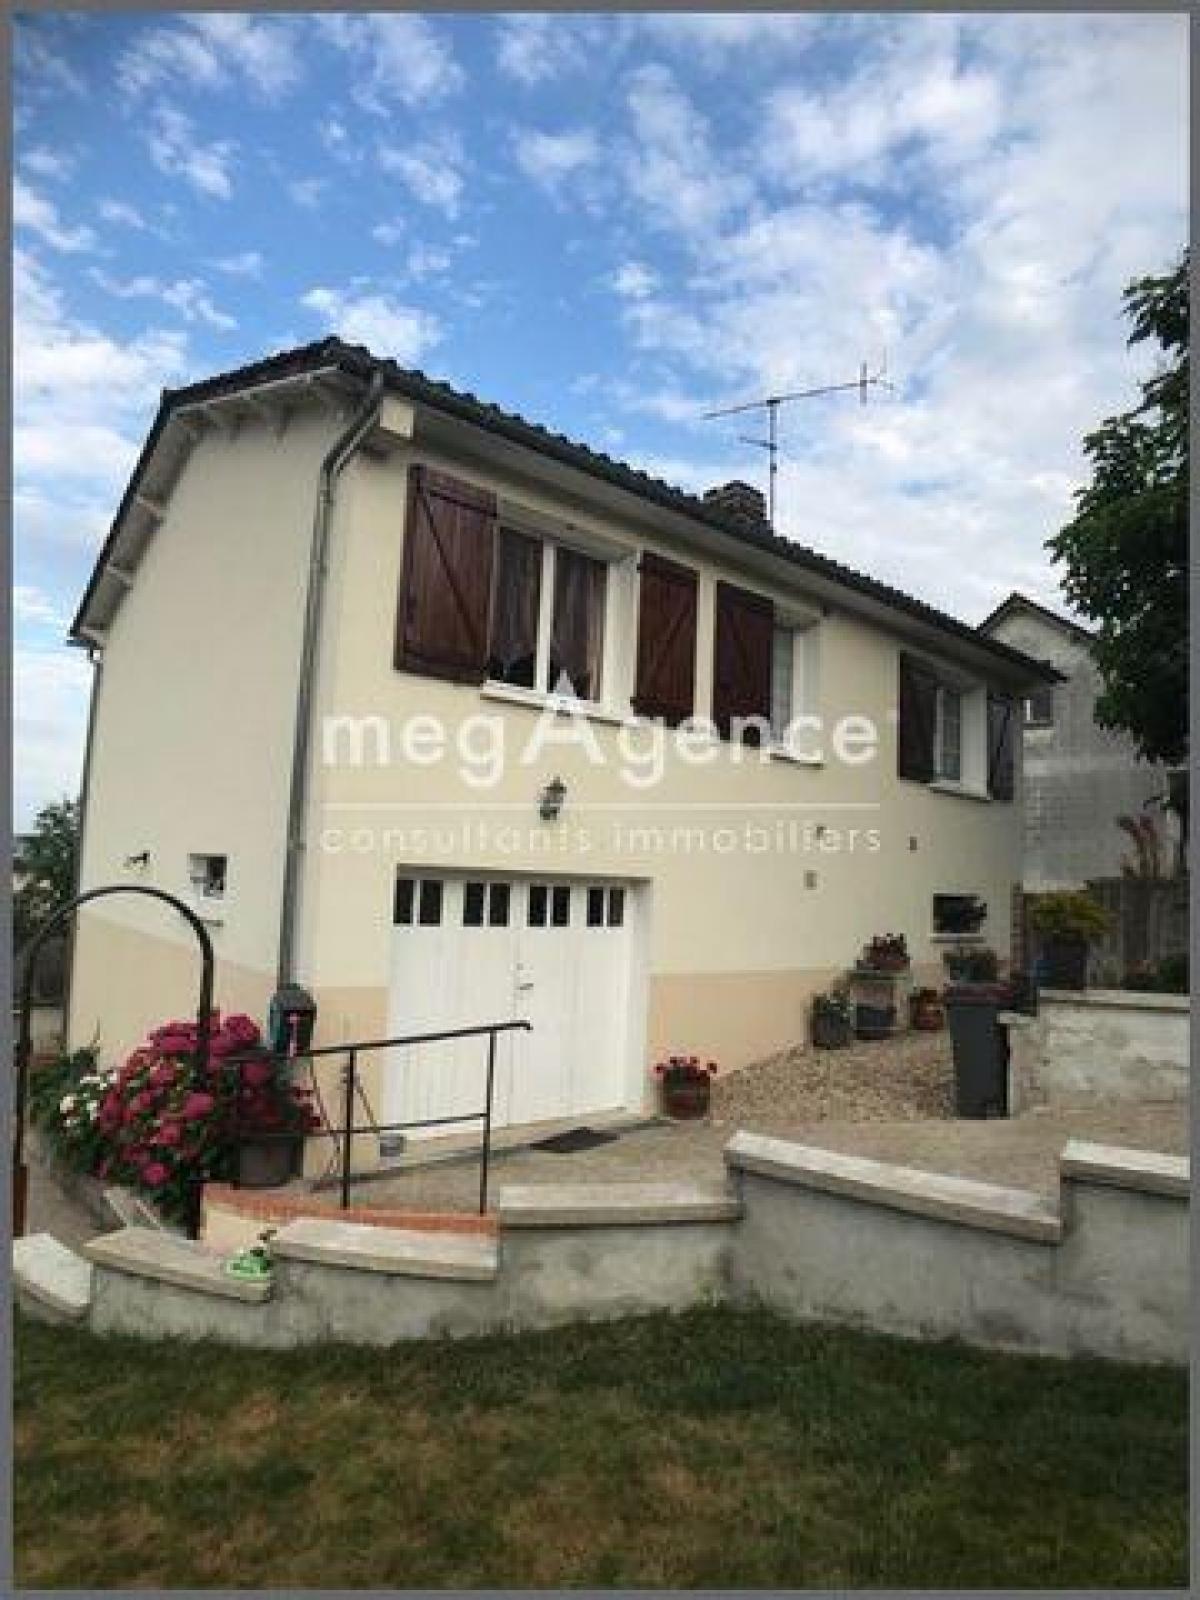 Picture of Home For Sale in Paron, Bourgogne, France